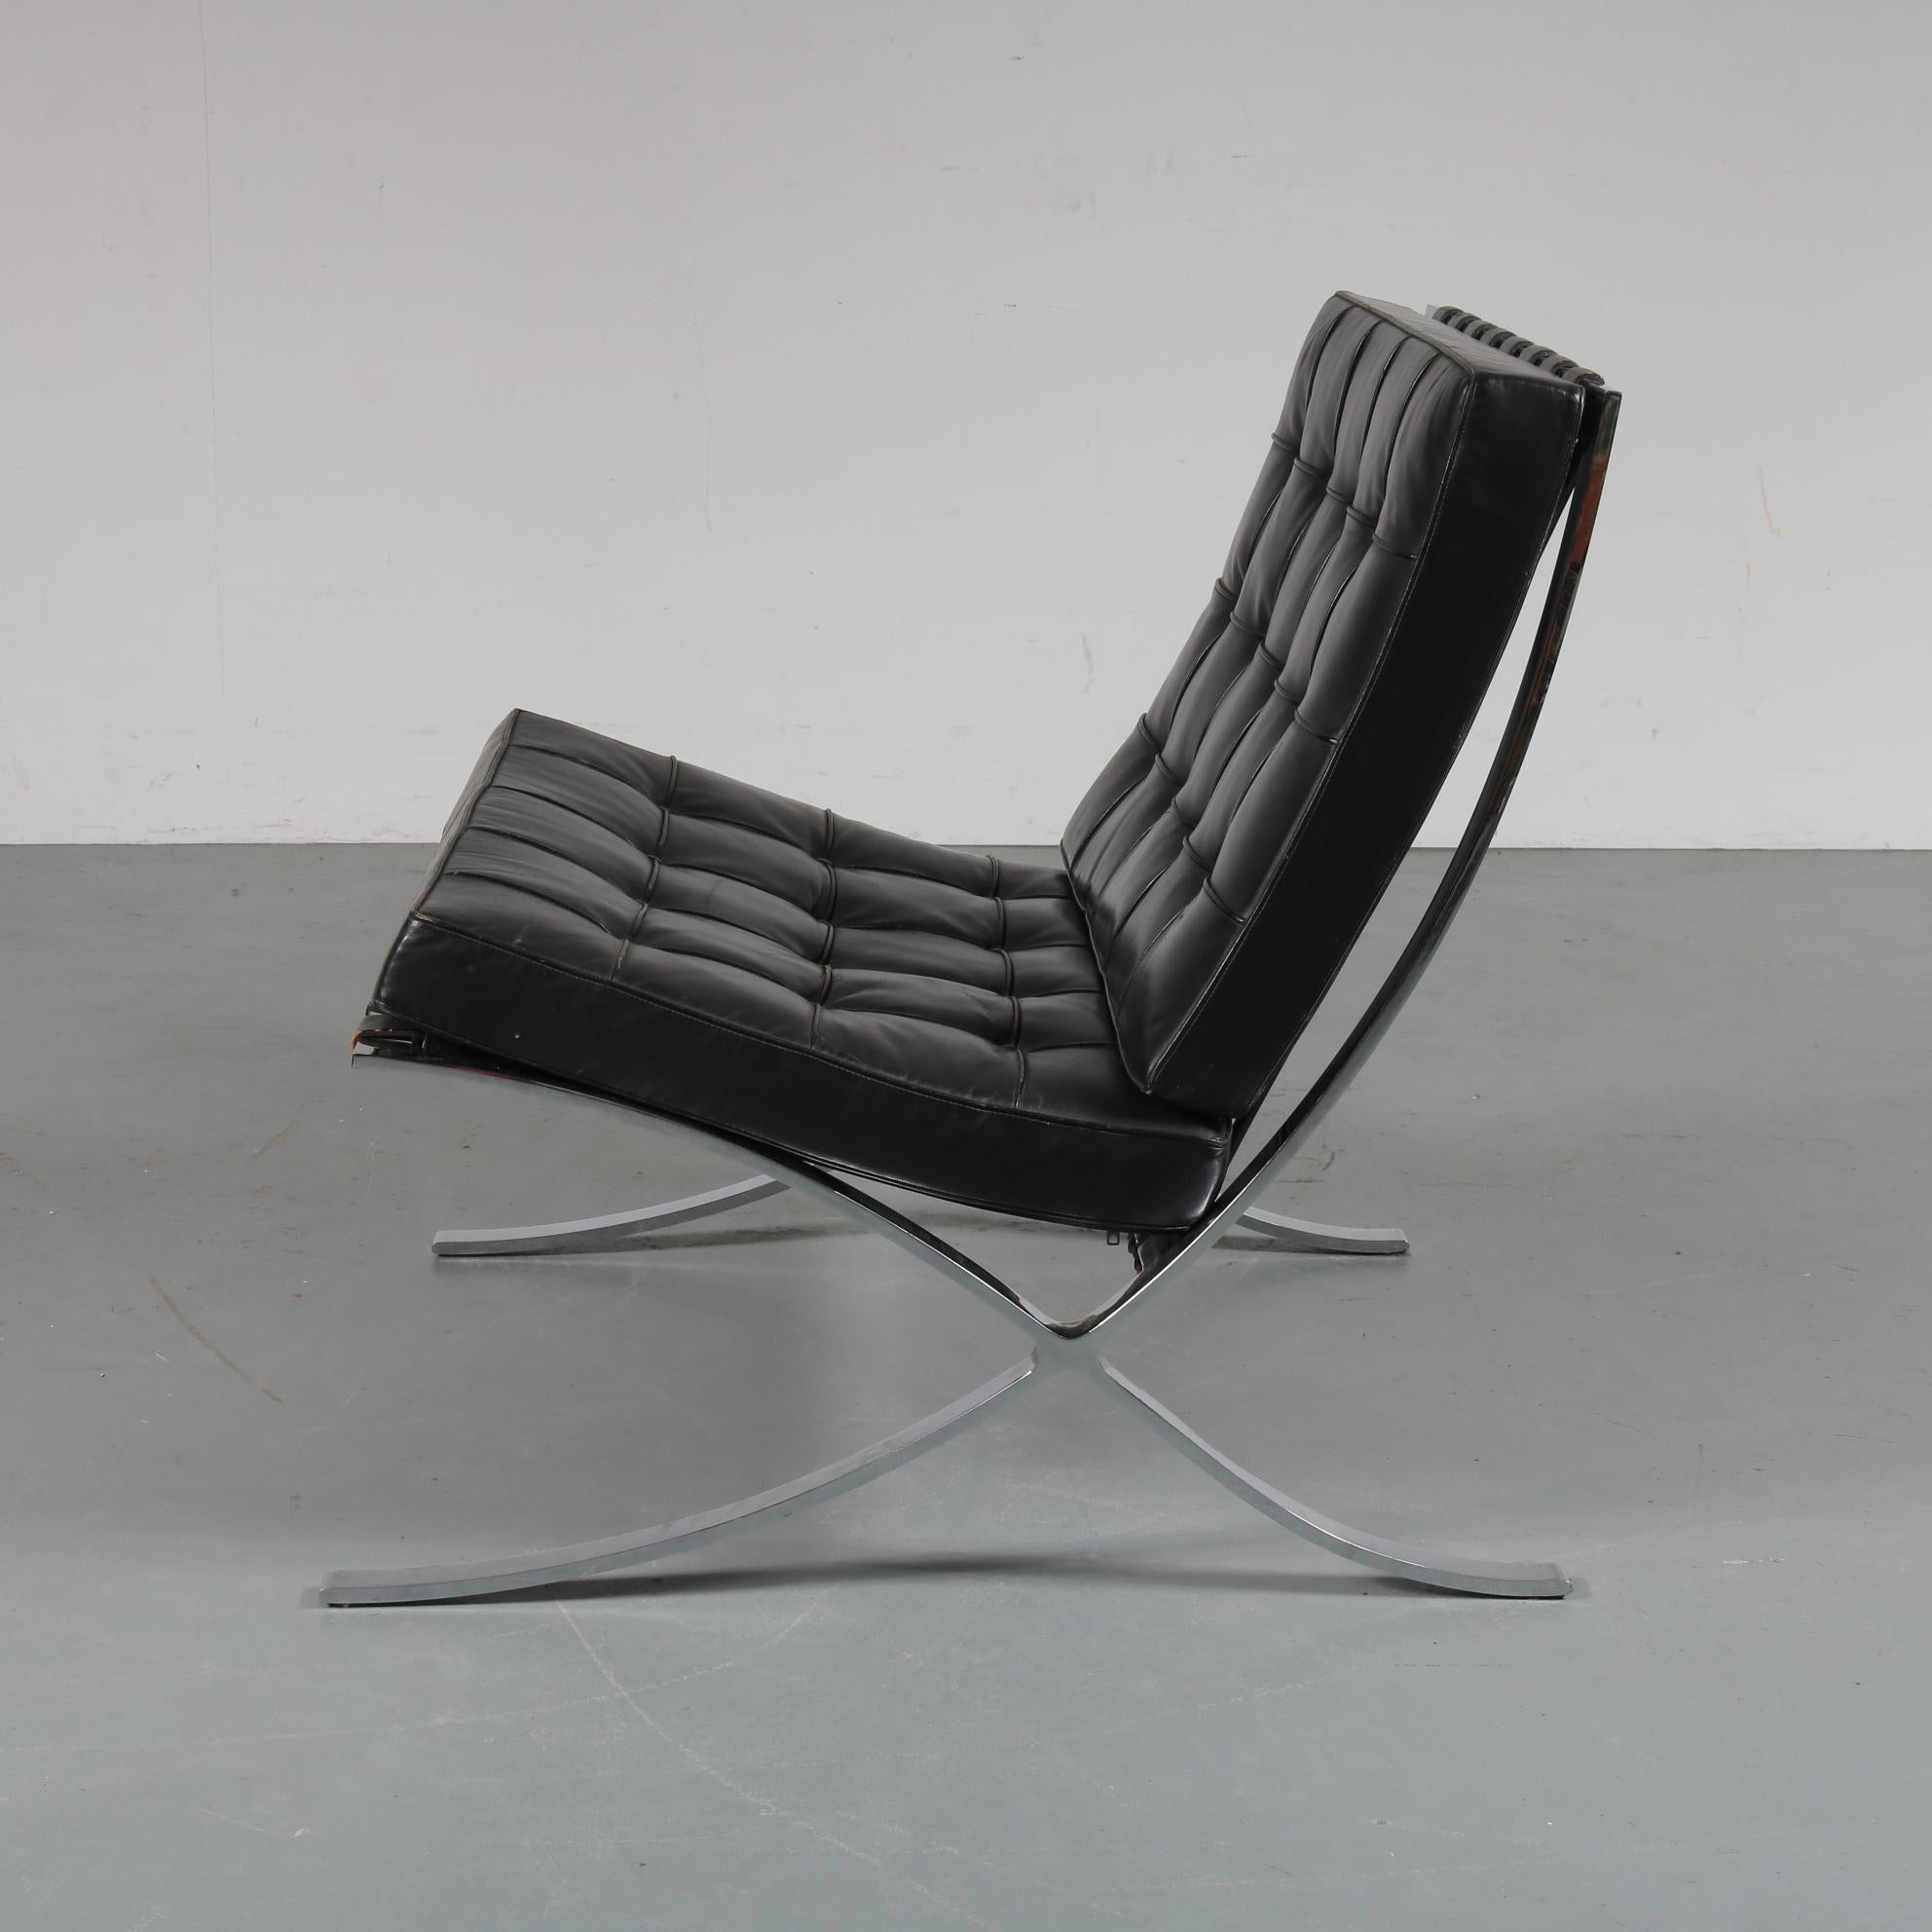 20th Century Pair of Barcelona Chairs by Mies Van Der Rohe for Knoll International, USA 1970